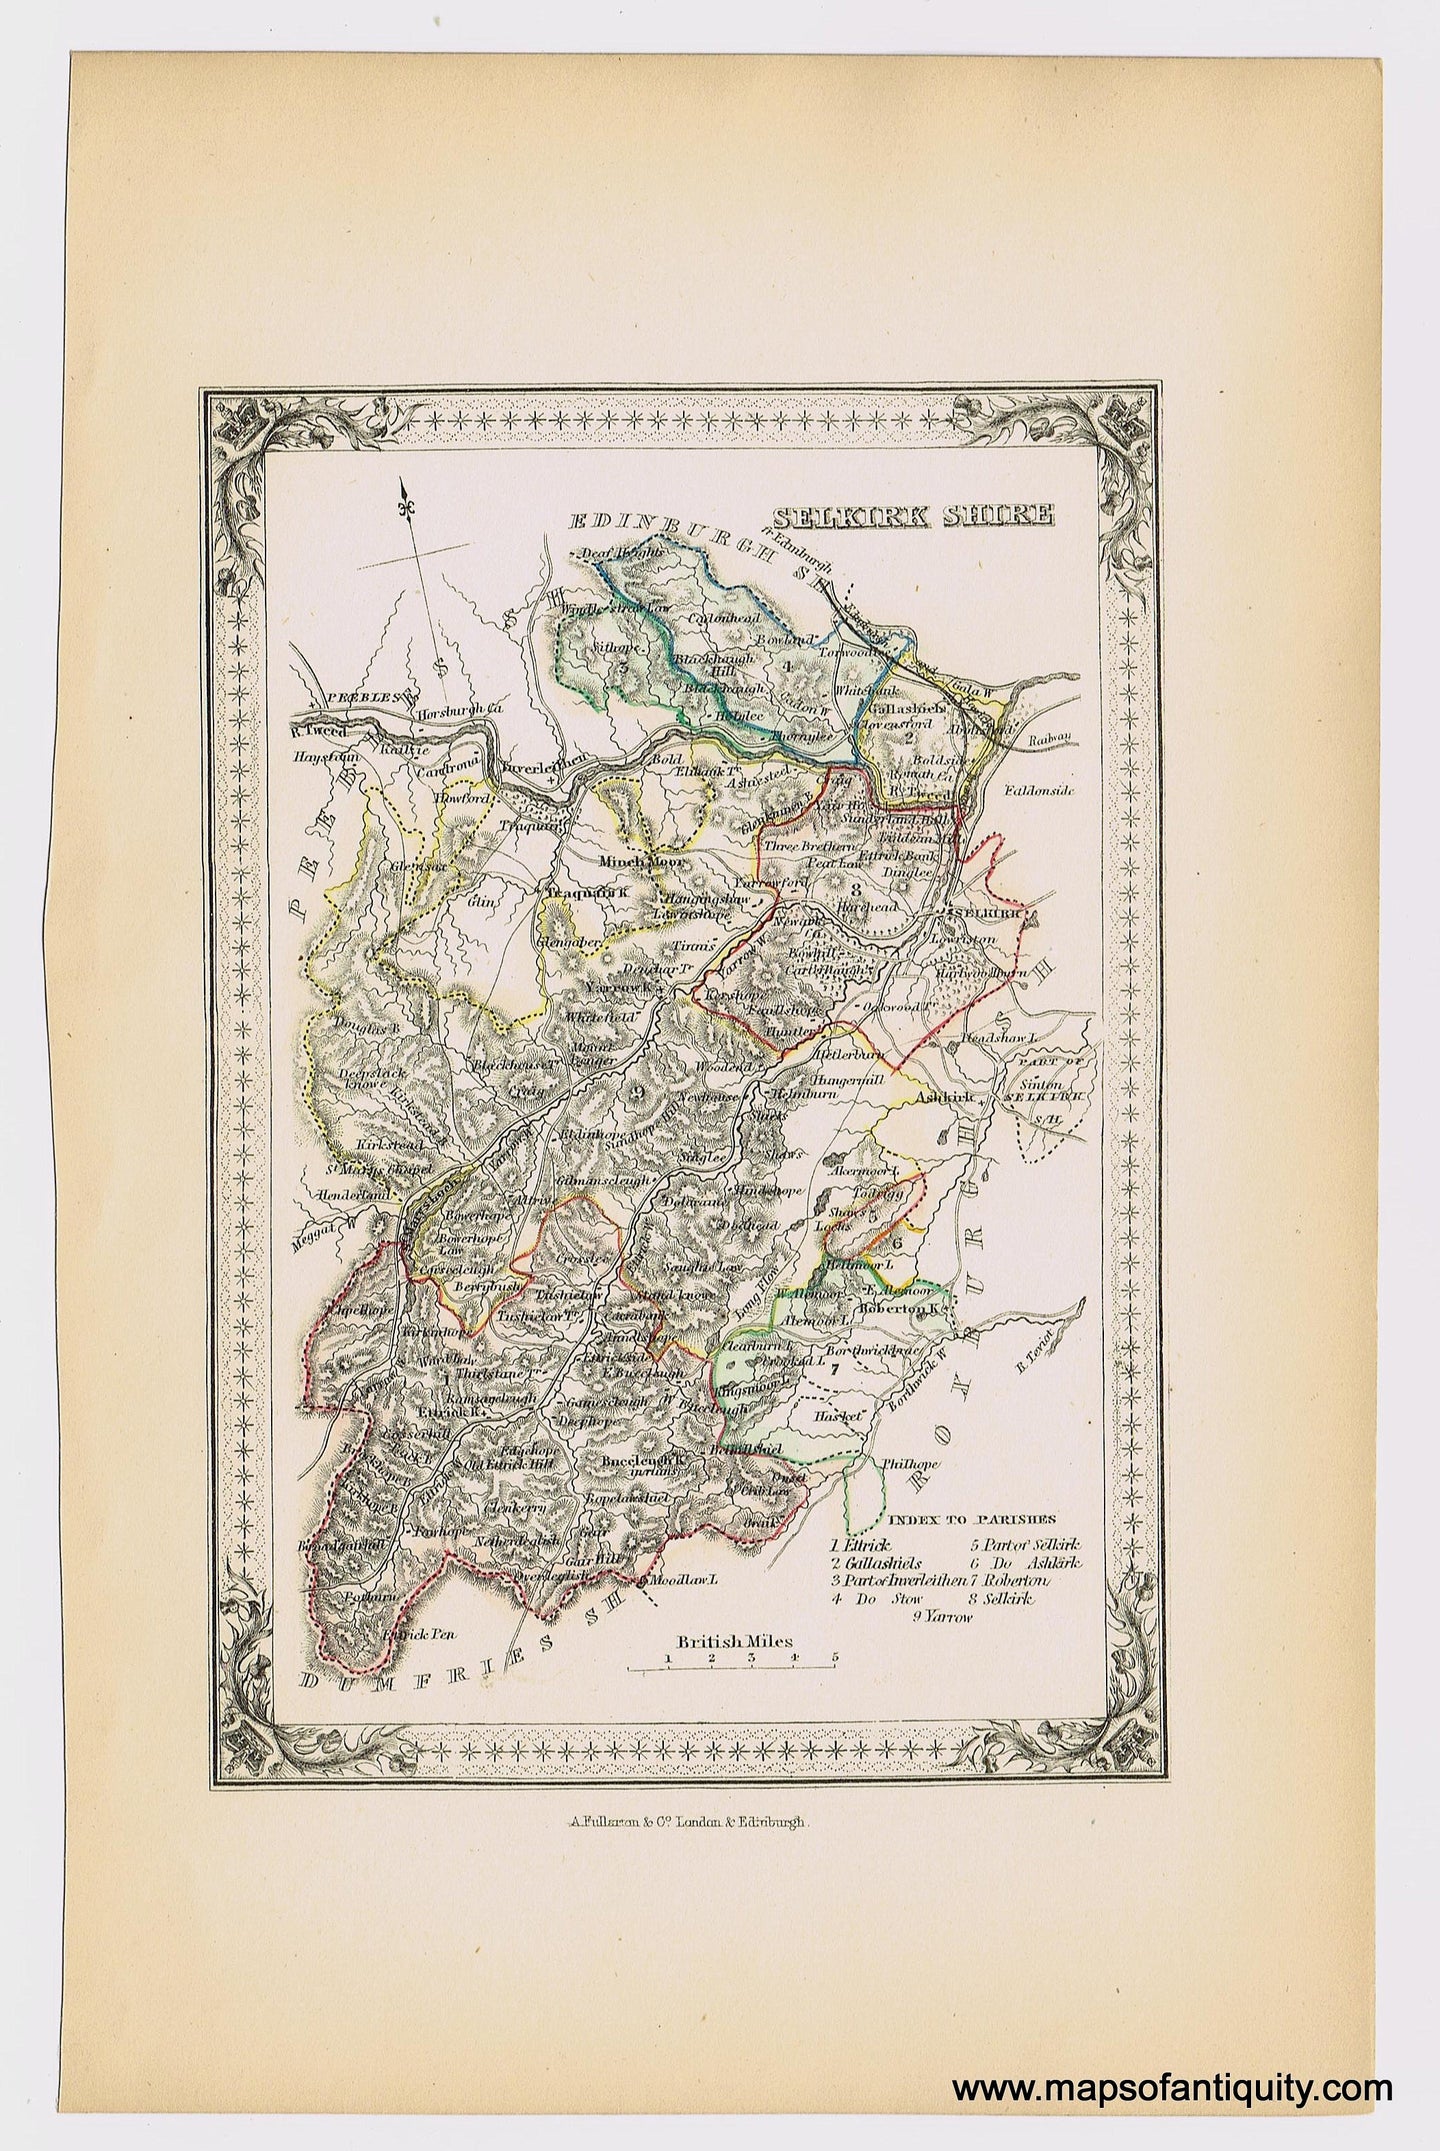 Genuine-Antique-Hand-colored-Map-Selkirk-Shire-1855-A-Fullarton-Co--Maps-Of-Antiquity